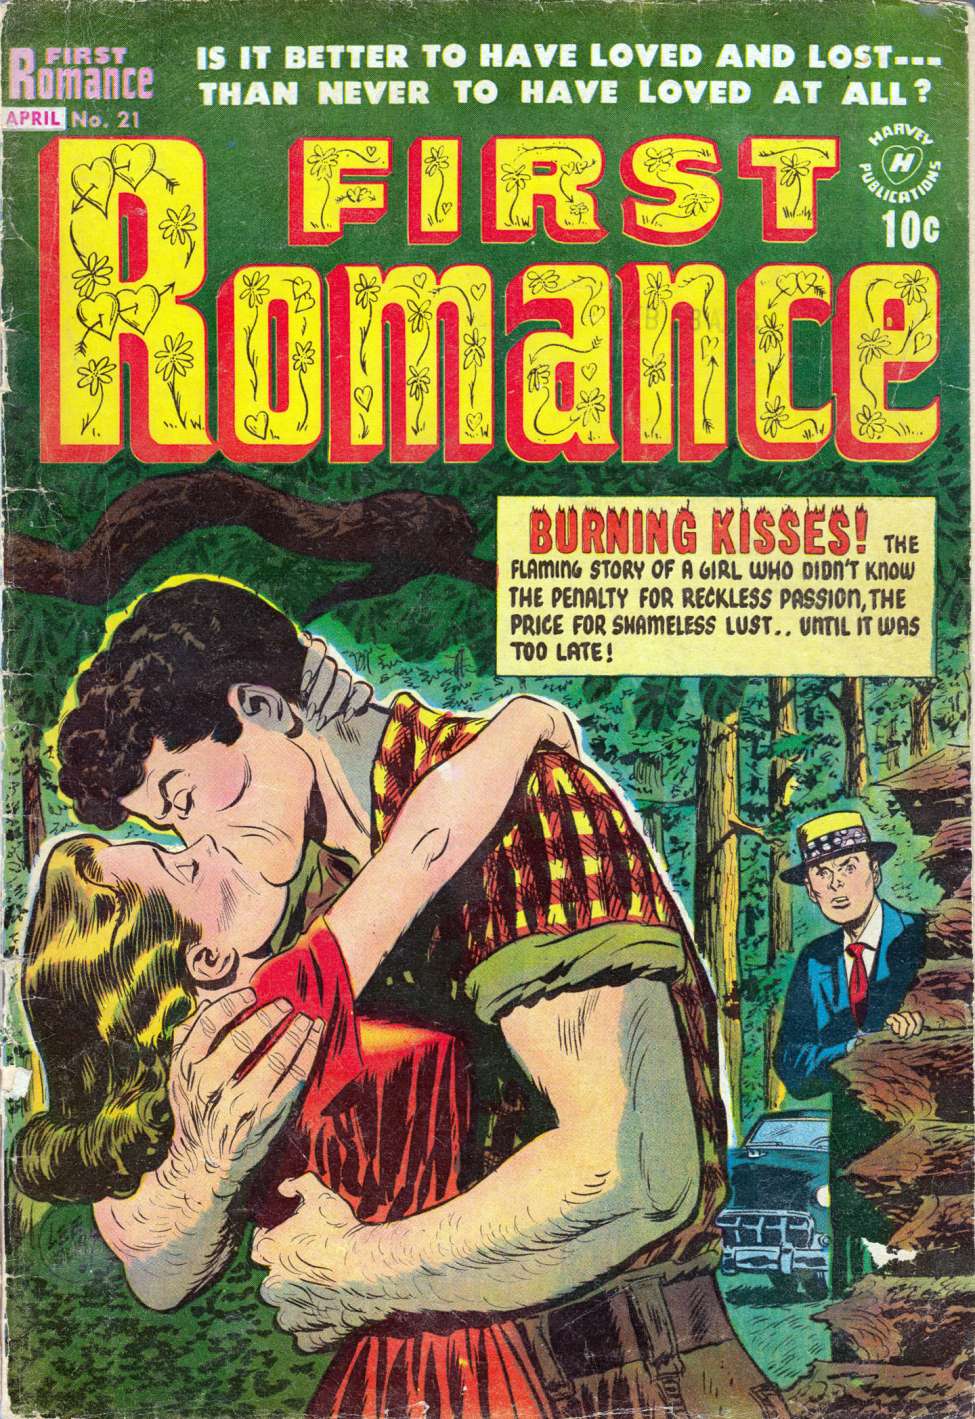 Book Cover For First Romance Magazine 21